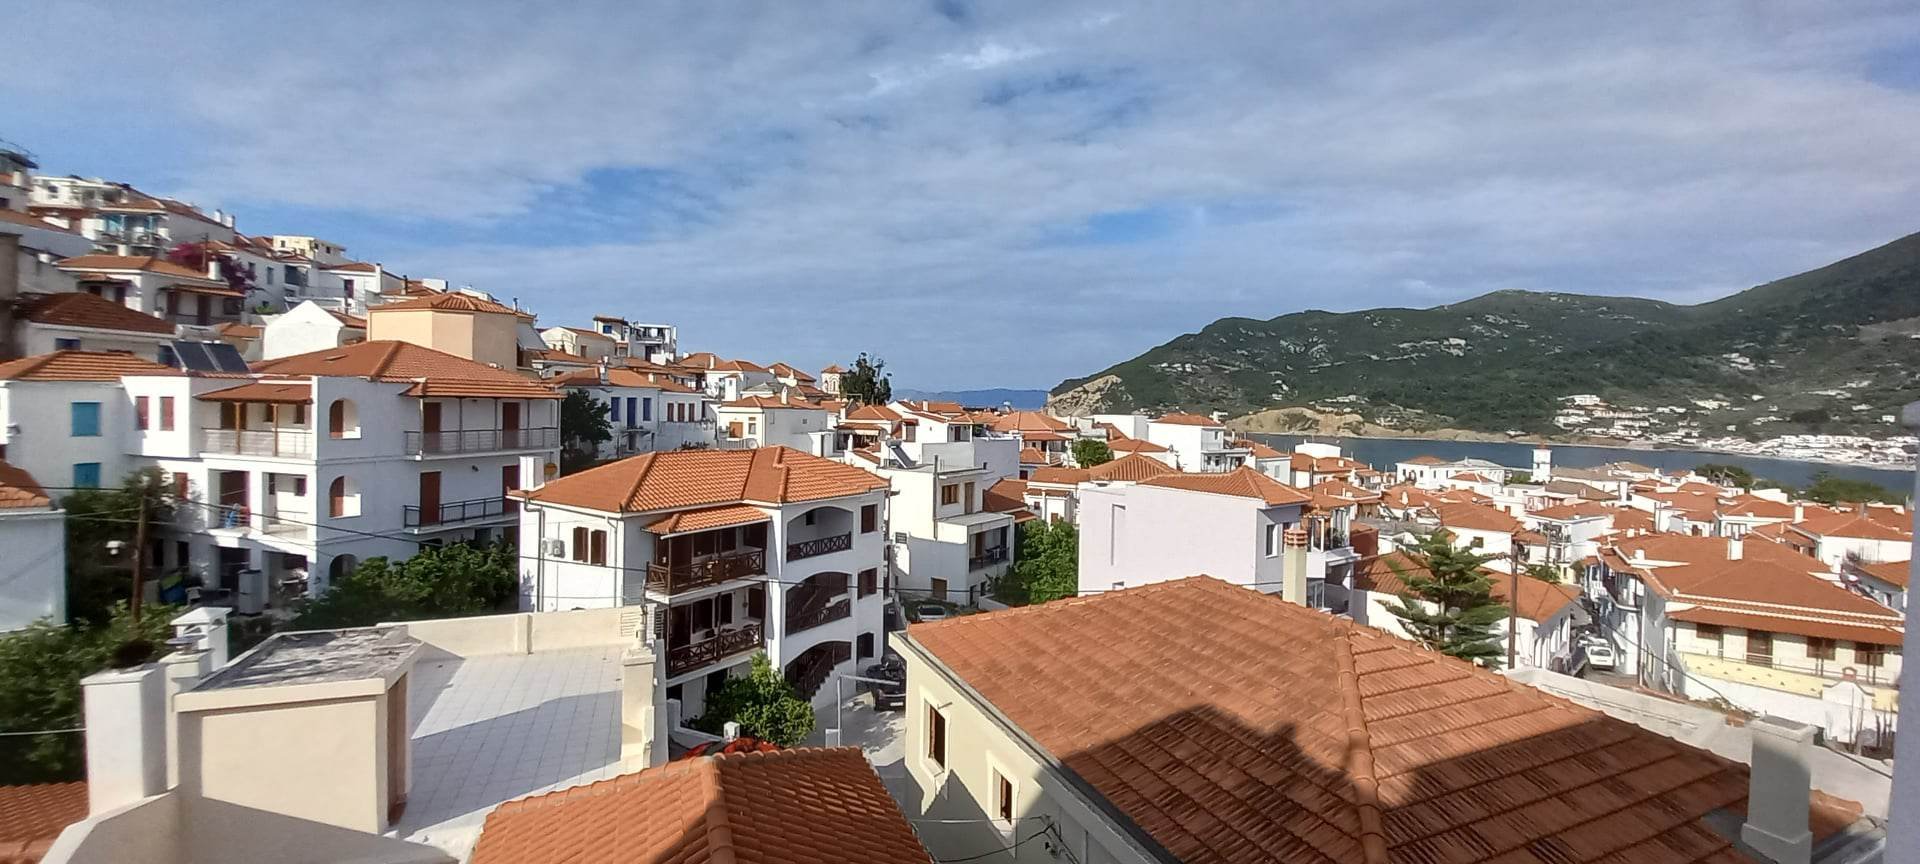 house_with_roof_terrace_and_workplace_skopelos_view.jpg